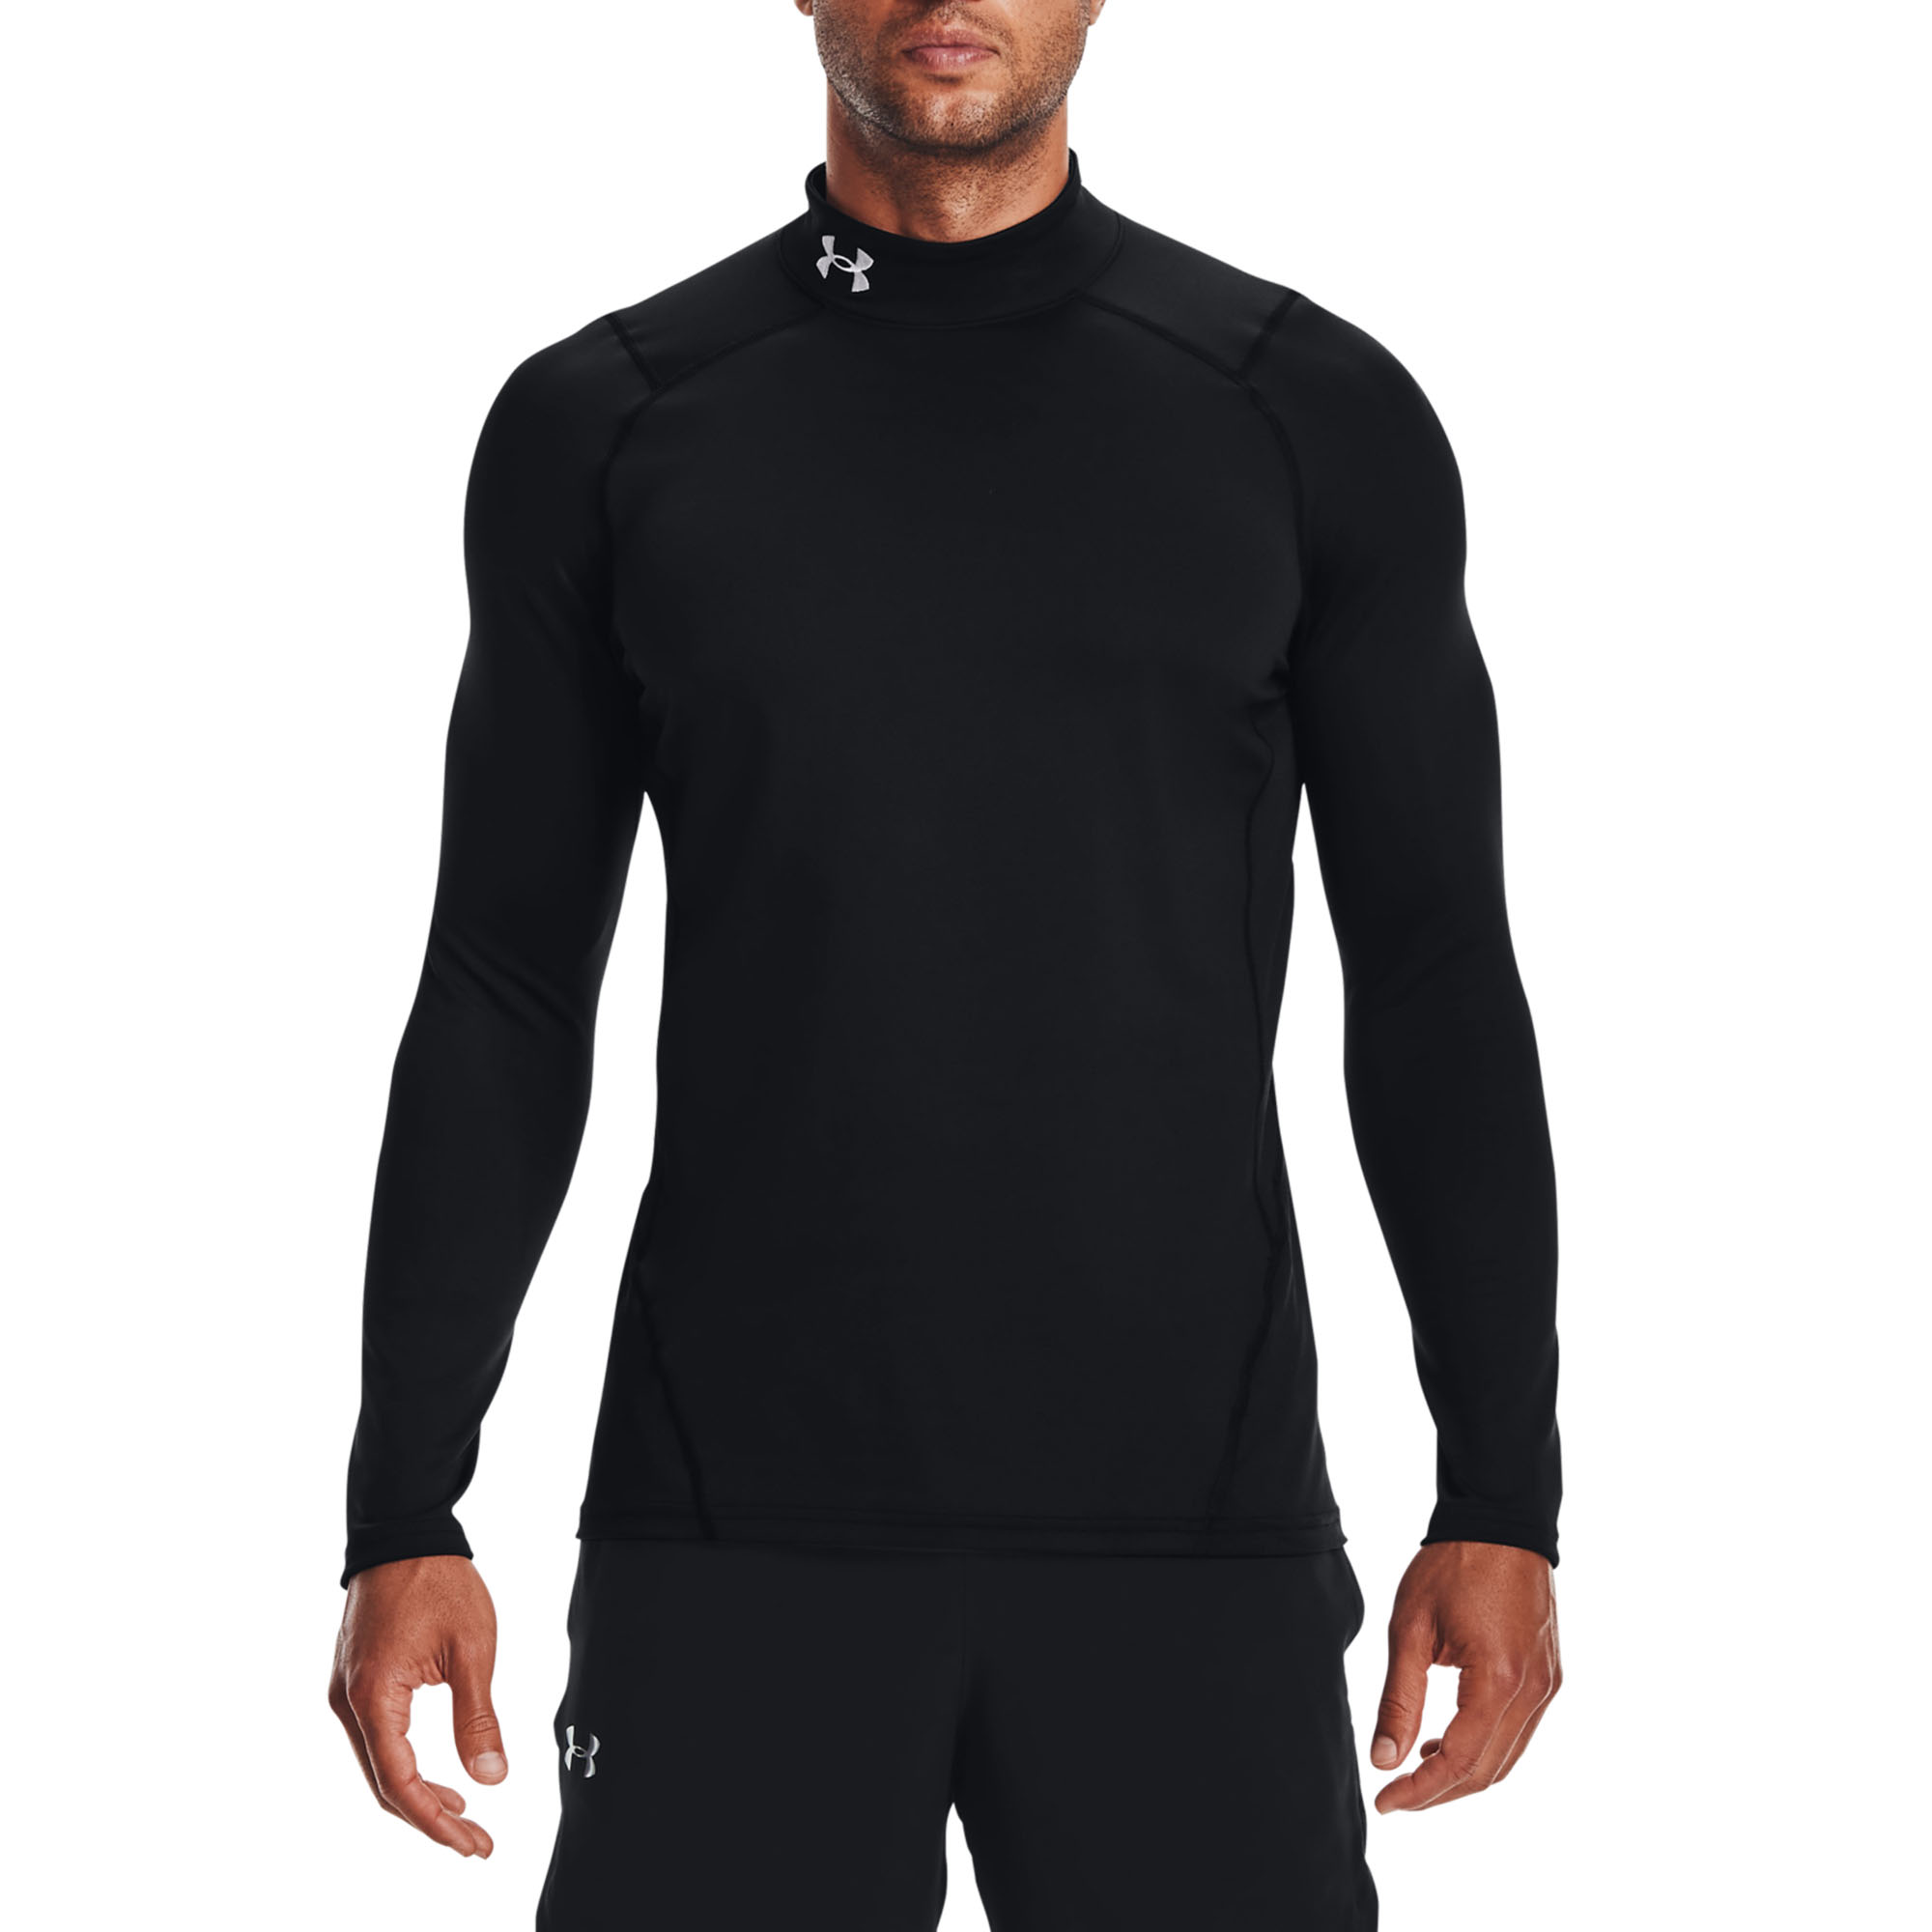 Under Armour Men's ColdGear Armour Fitted Mock Shirt